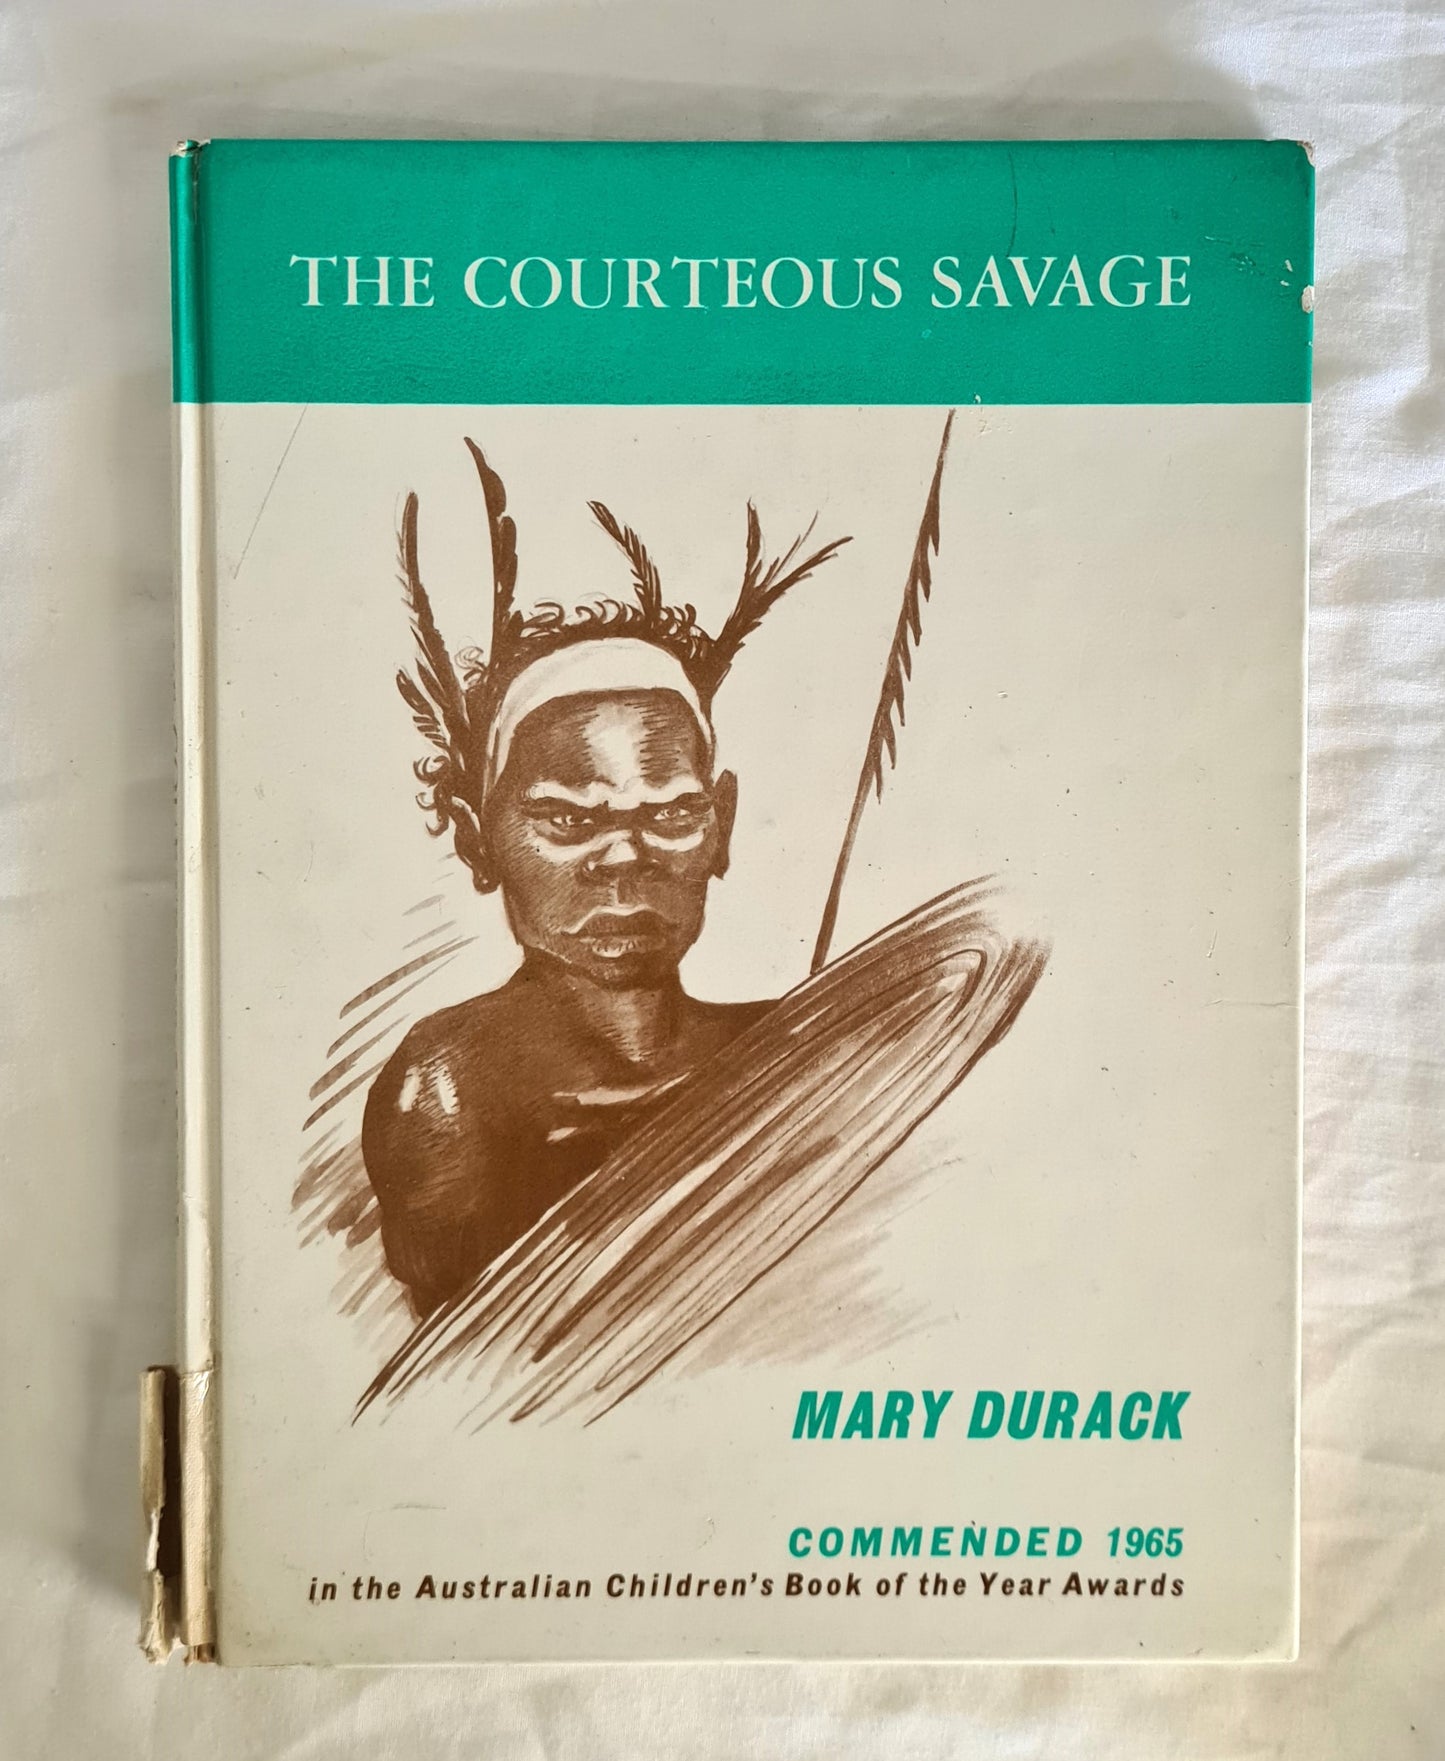 The Courteous Savage  Yagan of Swan River  by Mary Durack  Illustrated by Elizabeth Durack